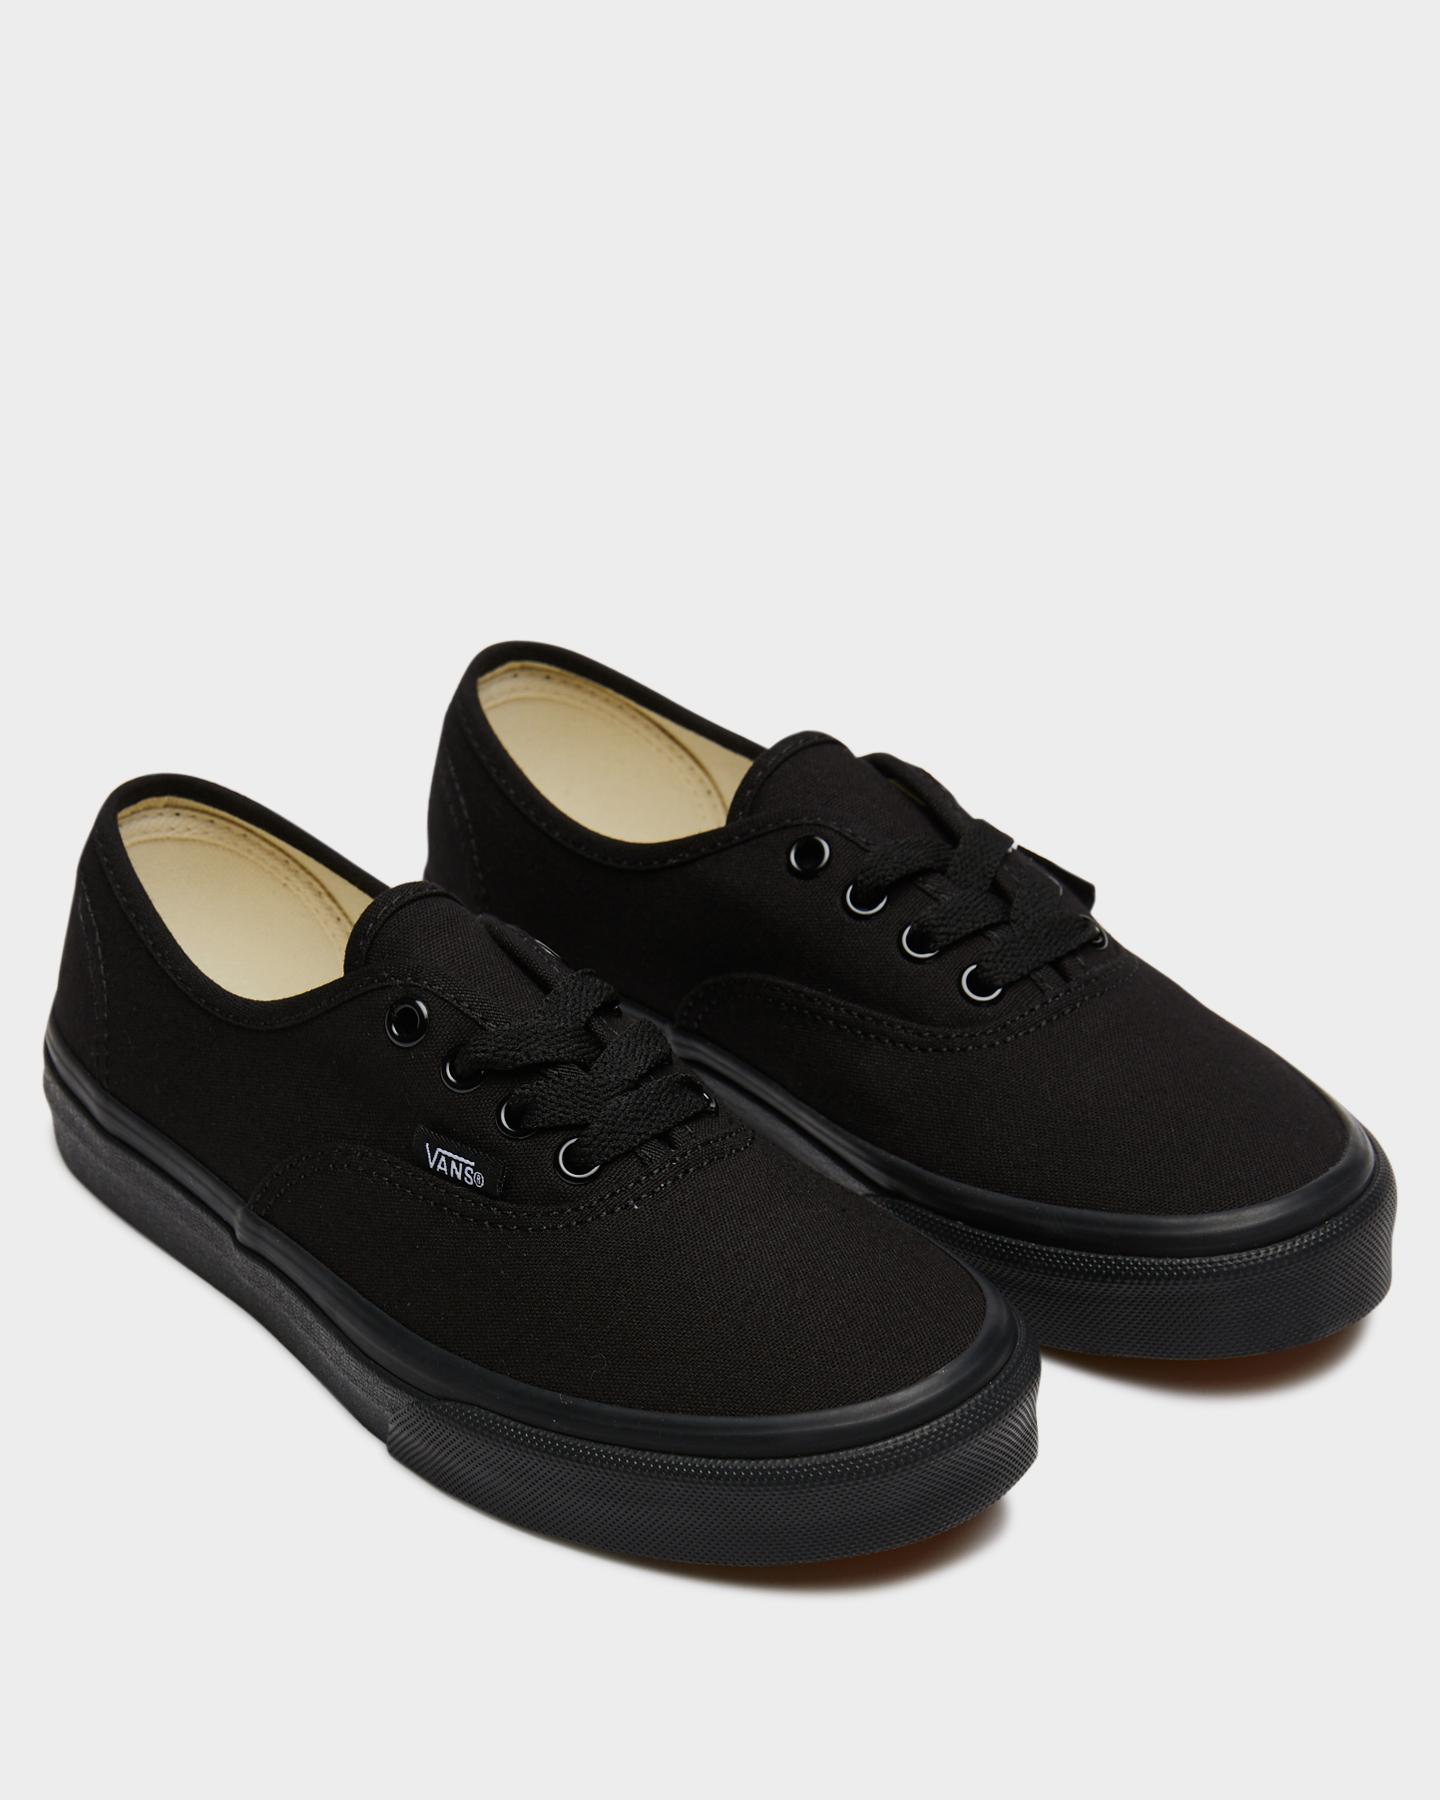 youth vans authentic skate shoe